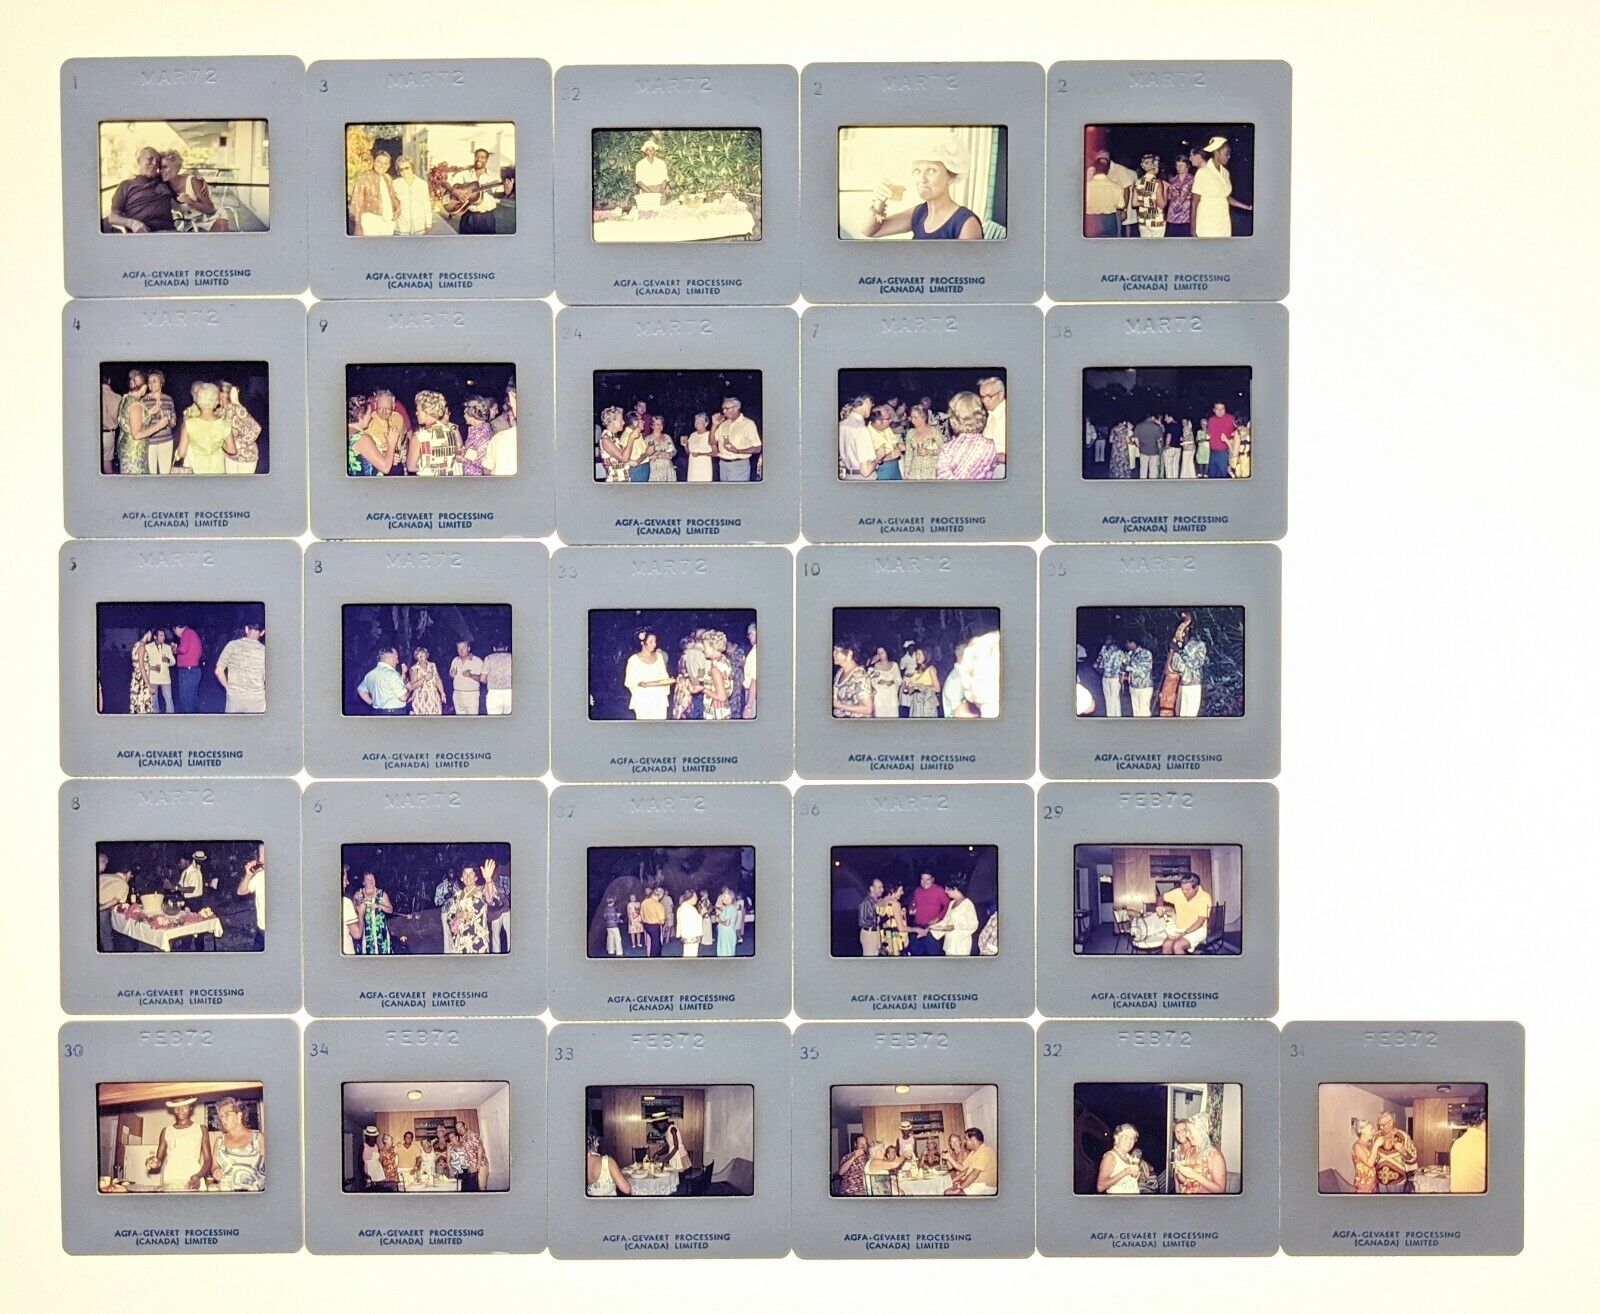 Lot of 36 Agfachrome slides - Caribbean party goers & Xmas in Canada 1970-72